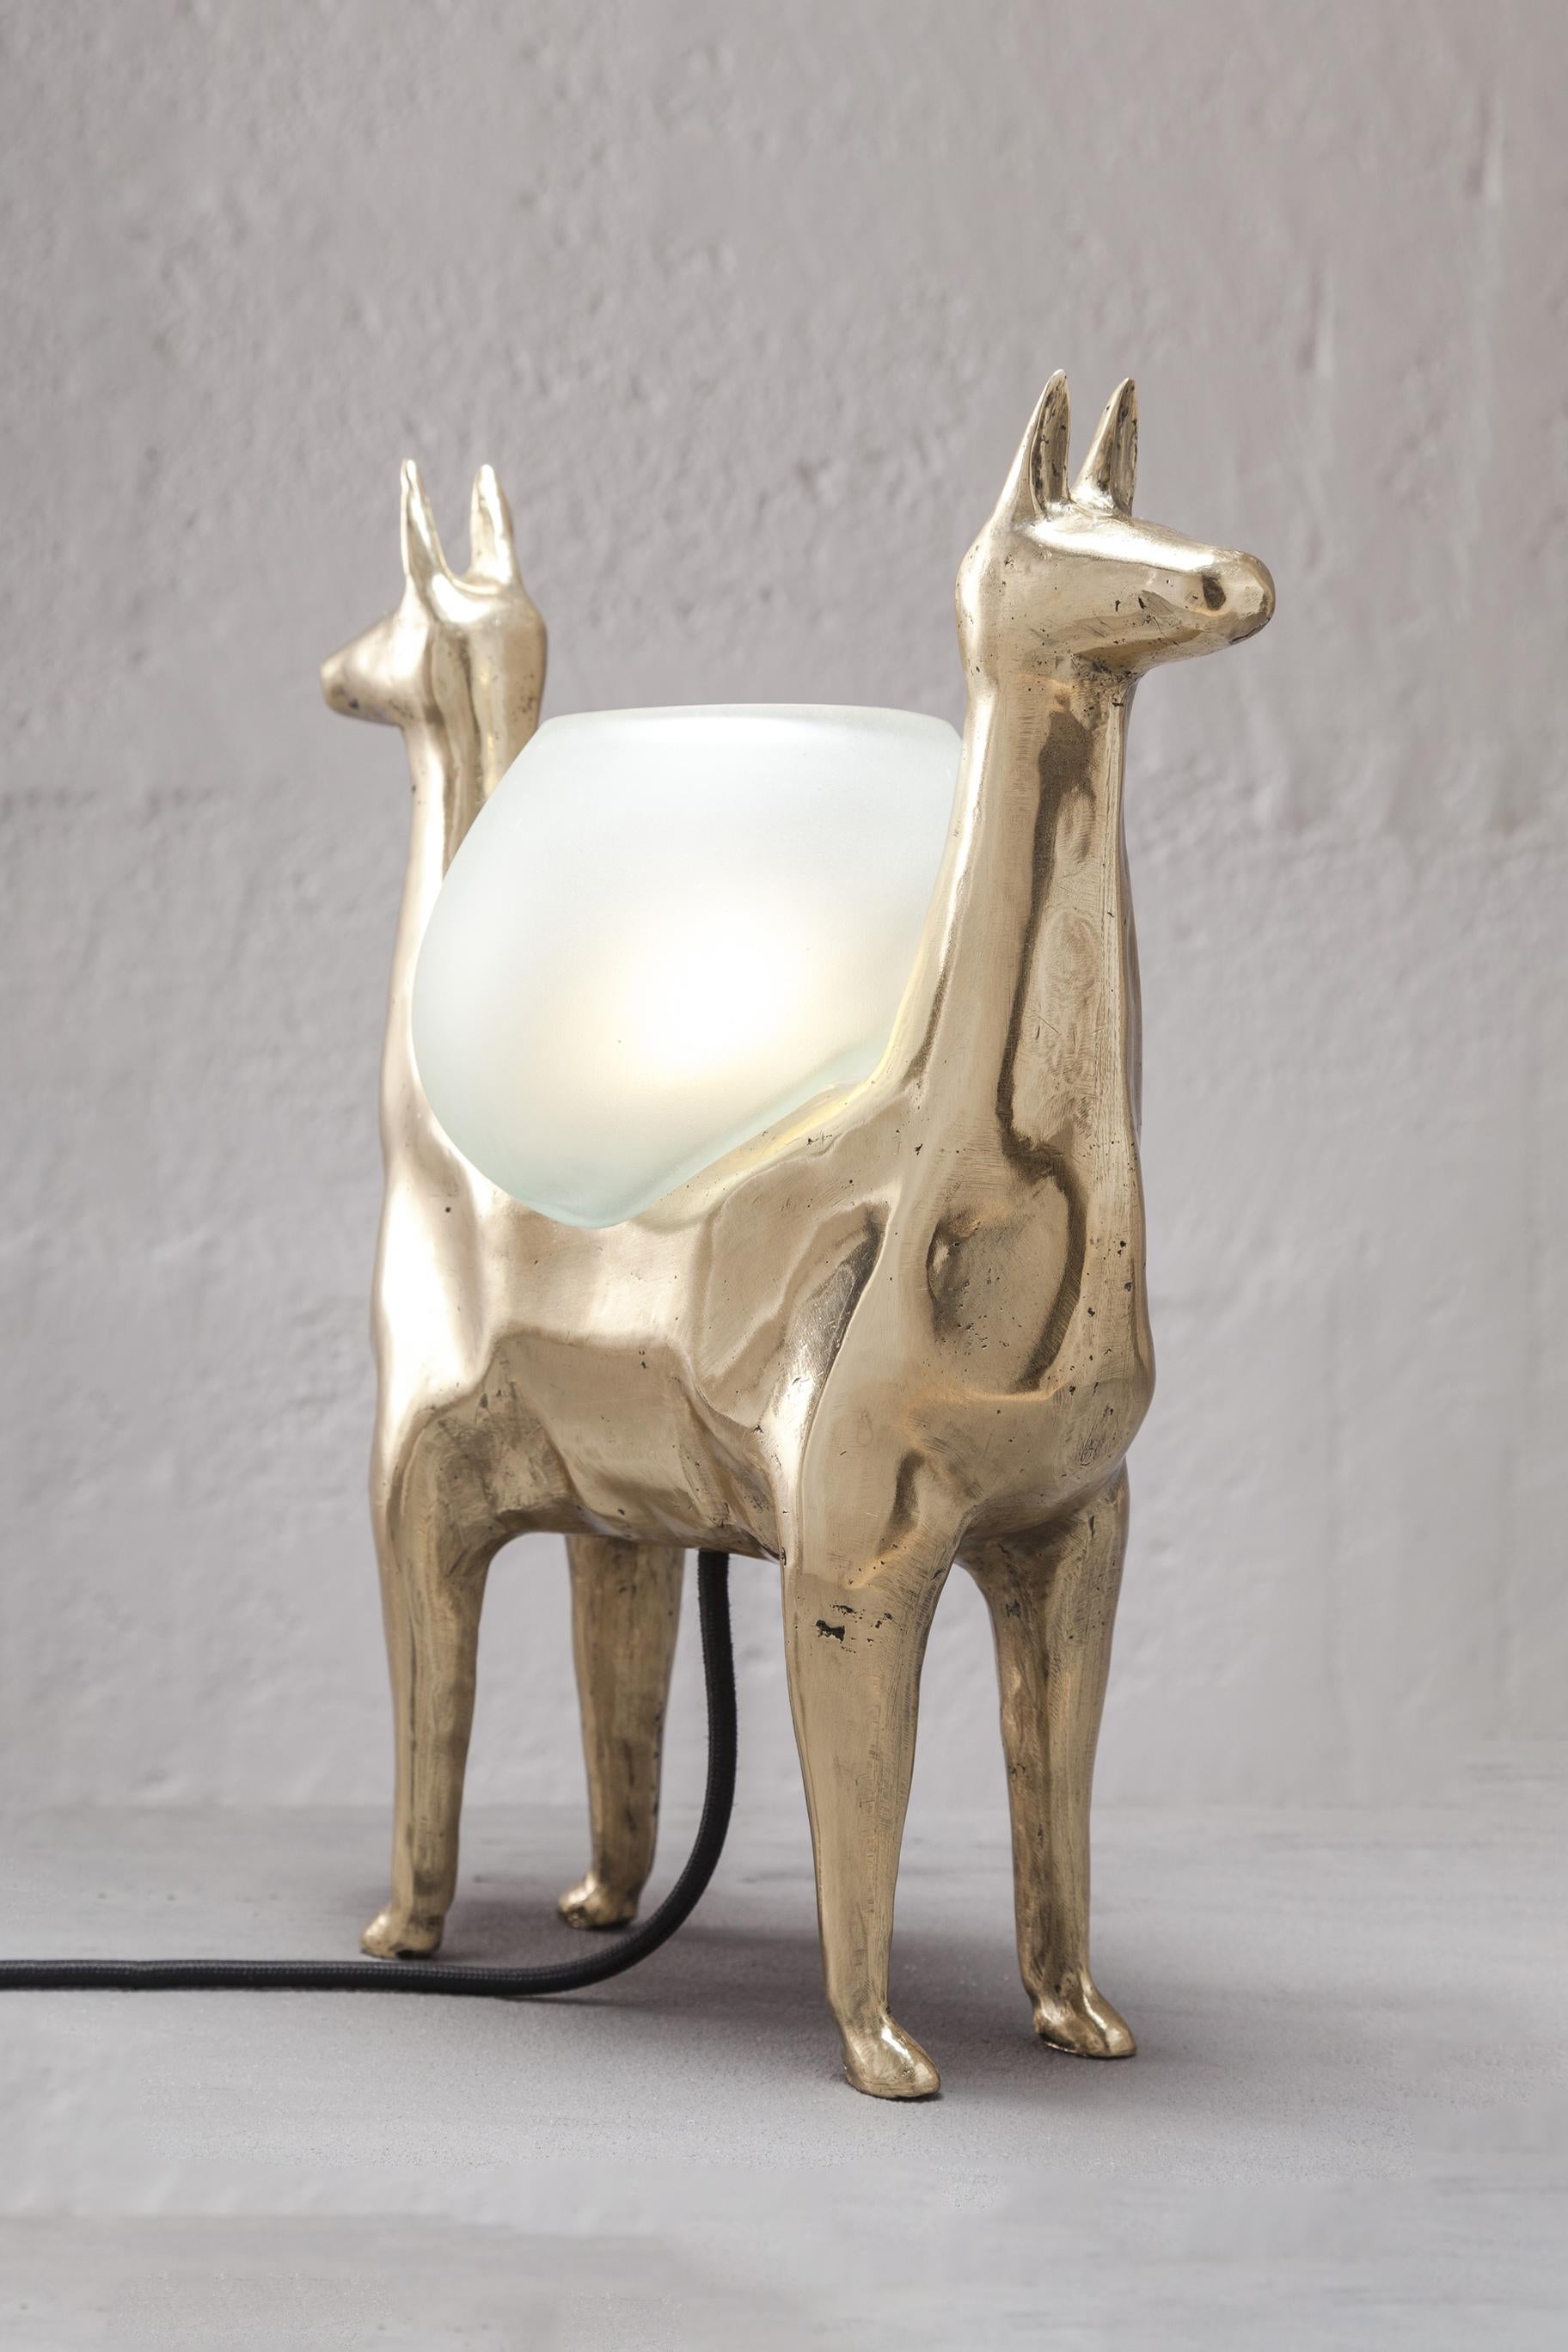 LLAMAS is a table lamp, composed of a lost-wax cast bronze body, and a handblown glass lampshade. It is a reinterpretation of an archetype of llama sculptures essential within Ecuadorian artisanship. The form was hand-sculpted in ceramic, then 3D